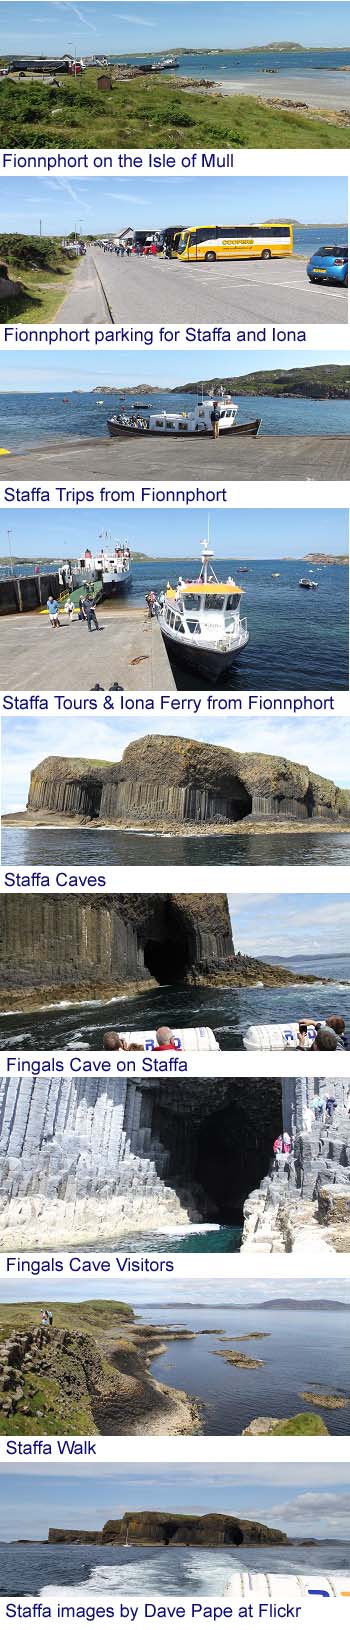 Staffa and Fingals Cave Photos